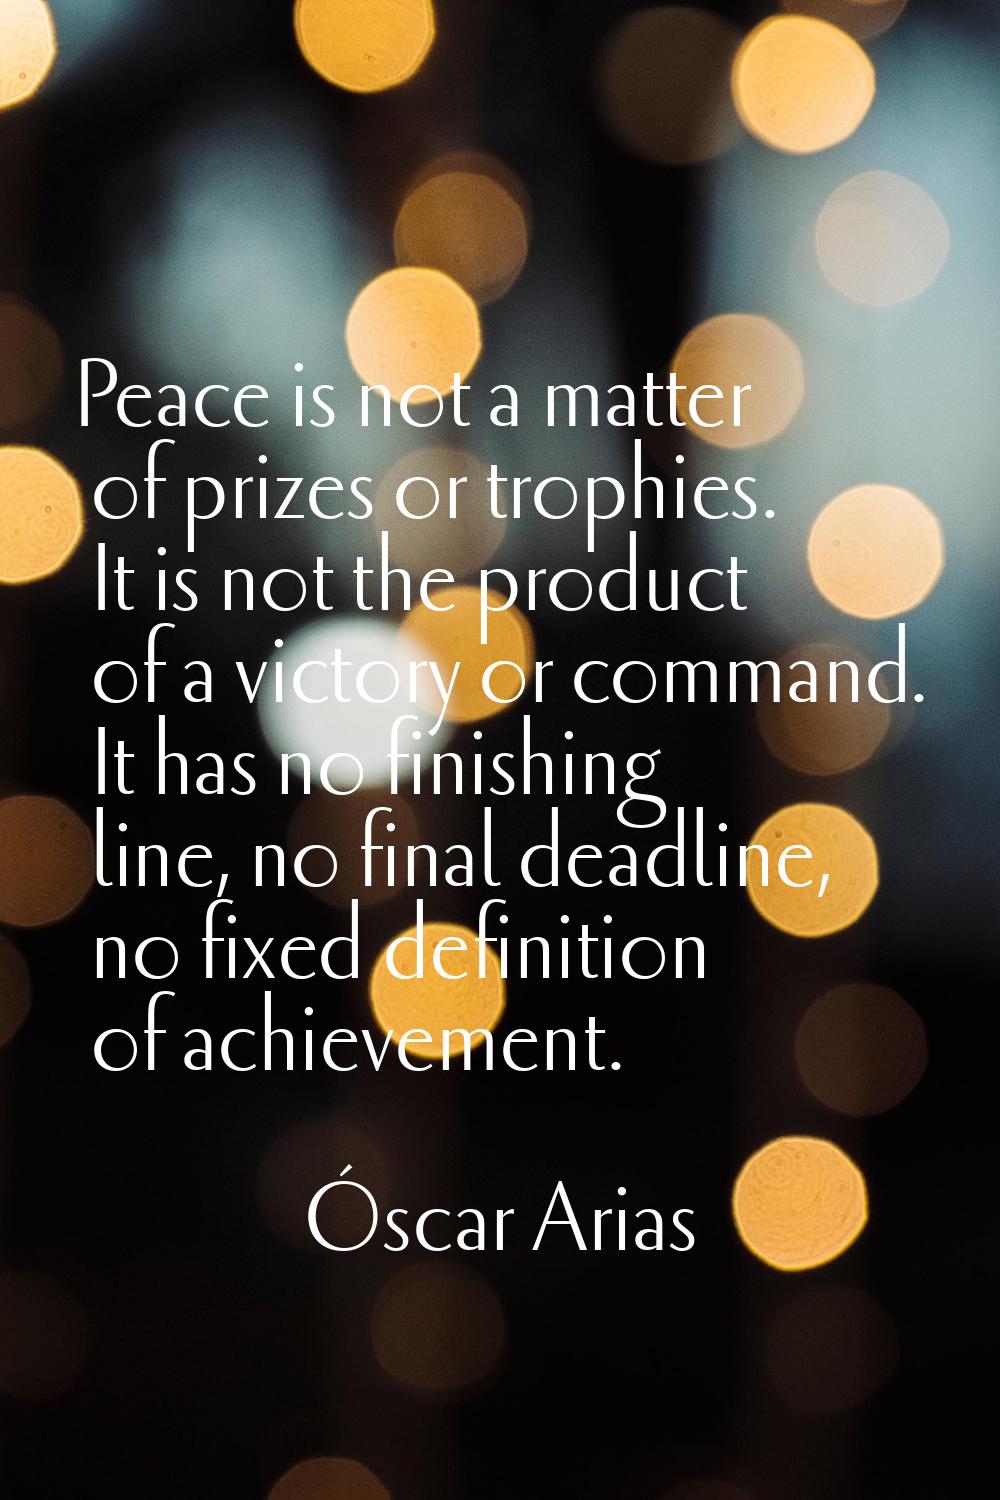 Peace is not a matter of prizes or trophies. It is not the product of a victory or command. It has 